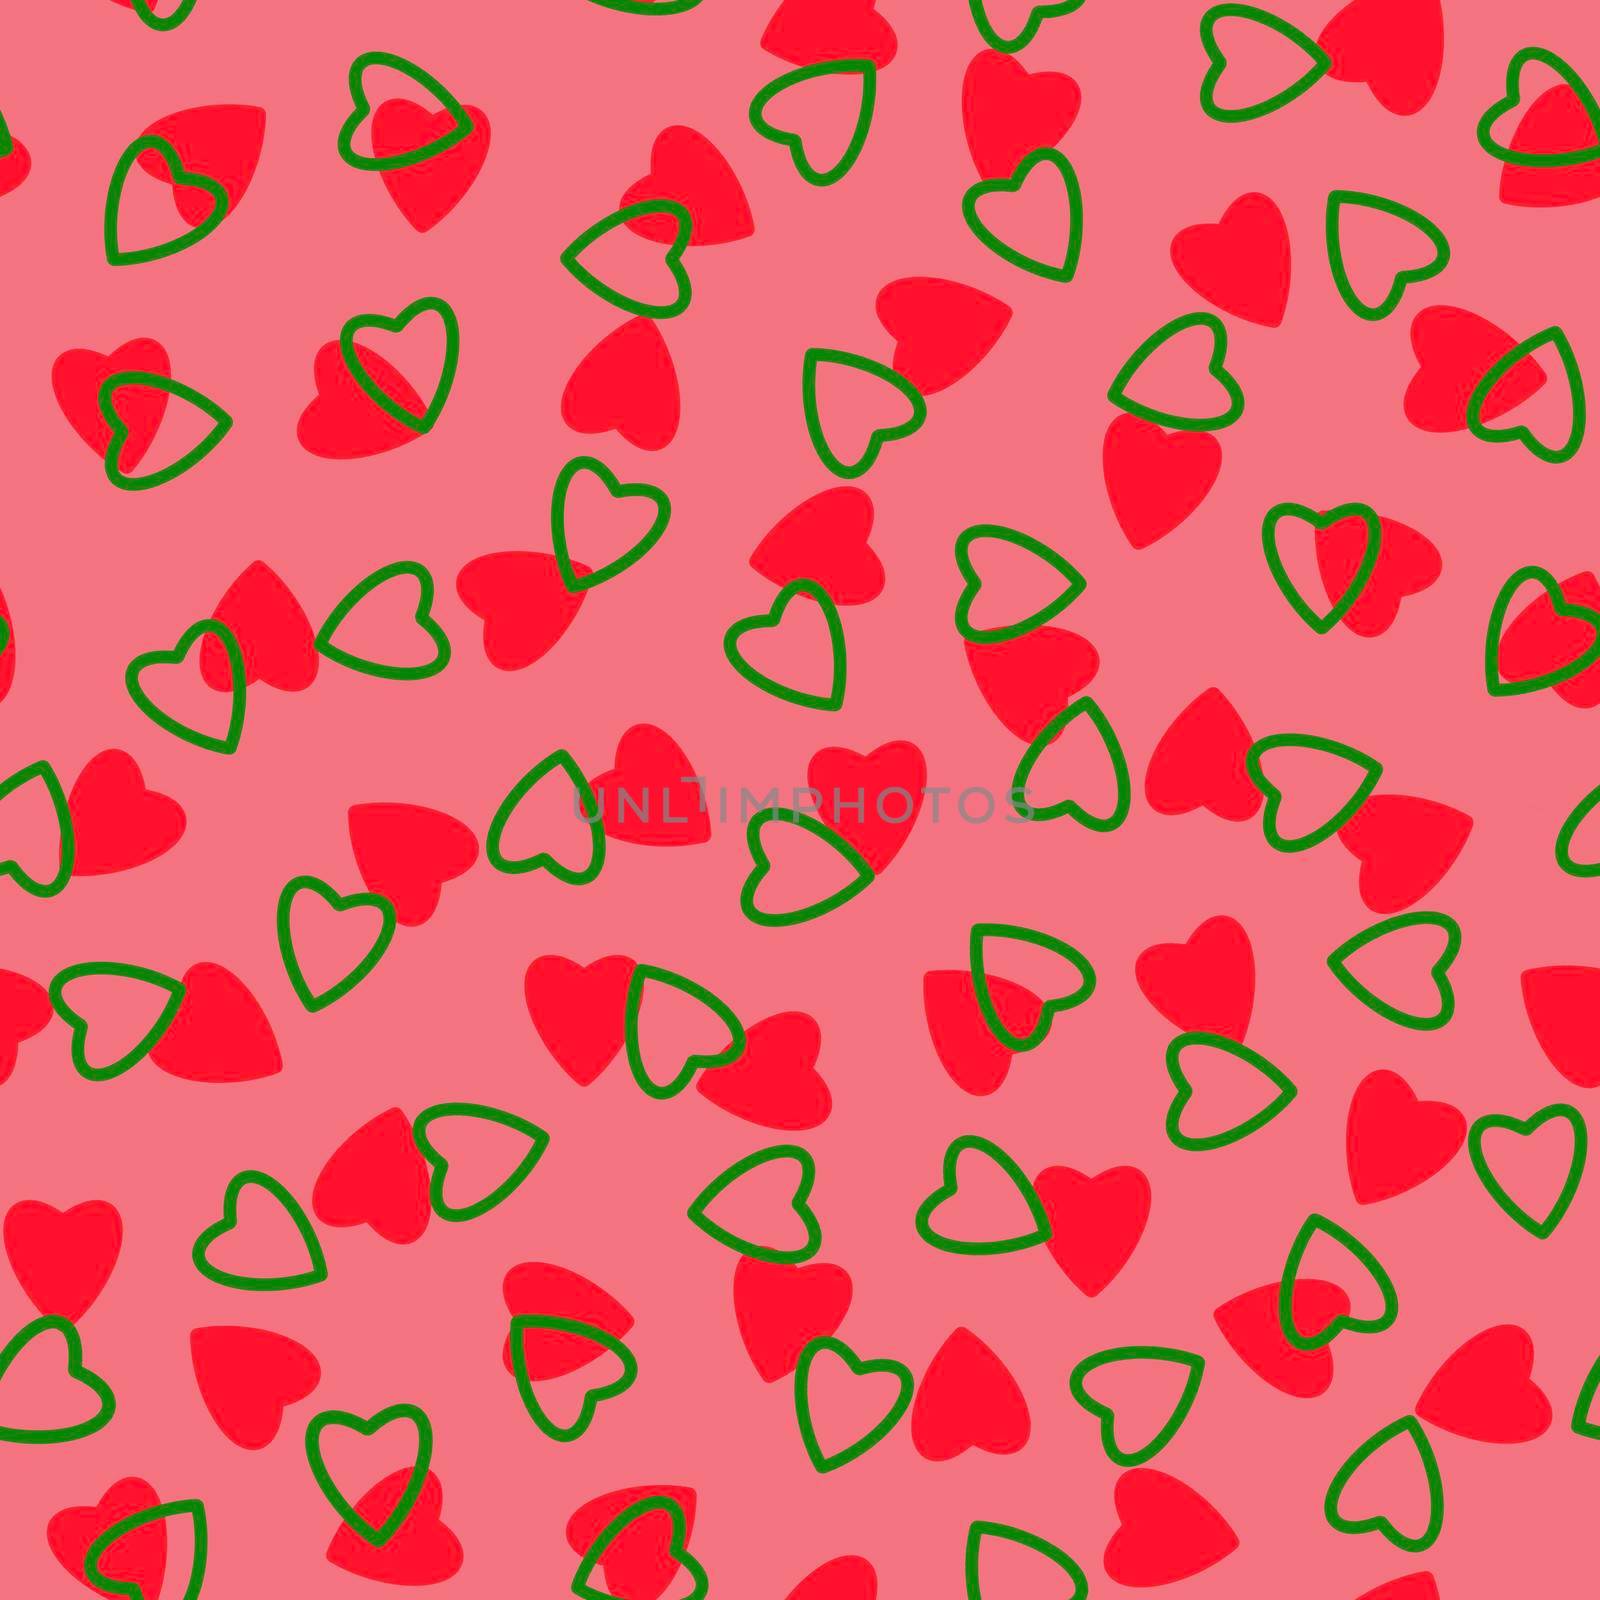 Simple hearts seamless pattern,endless chaotic texture made of tiny heart silhouettes.Valentines,mothers day background.Great for Easter,wedding,scrapbook,gift wrapping paper,textiles.Red,green,pink.